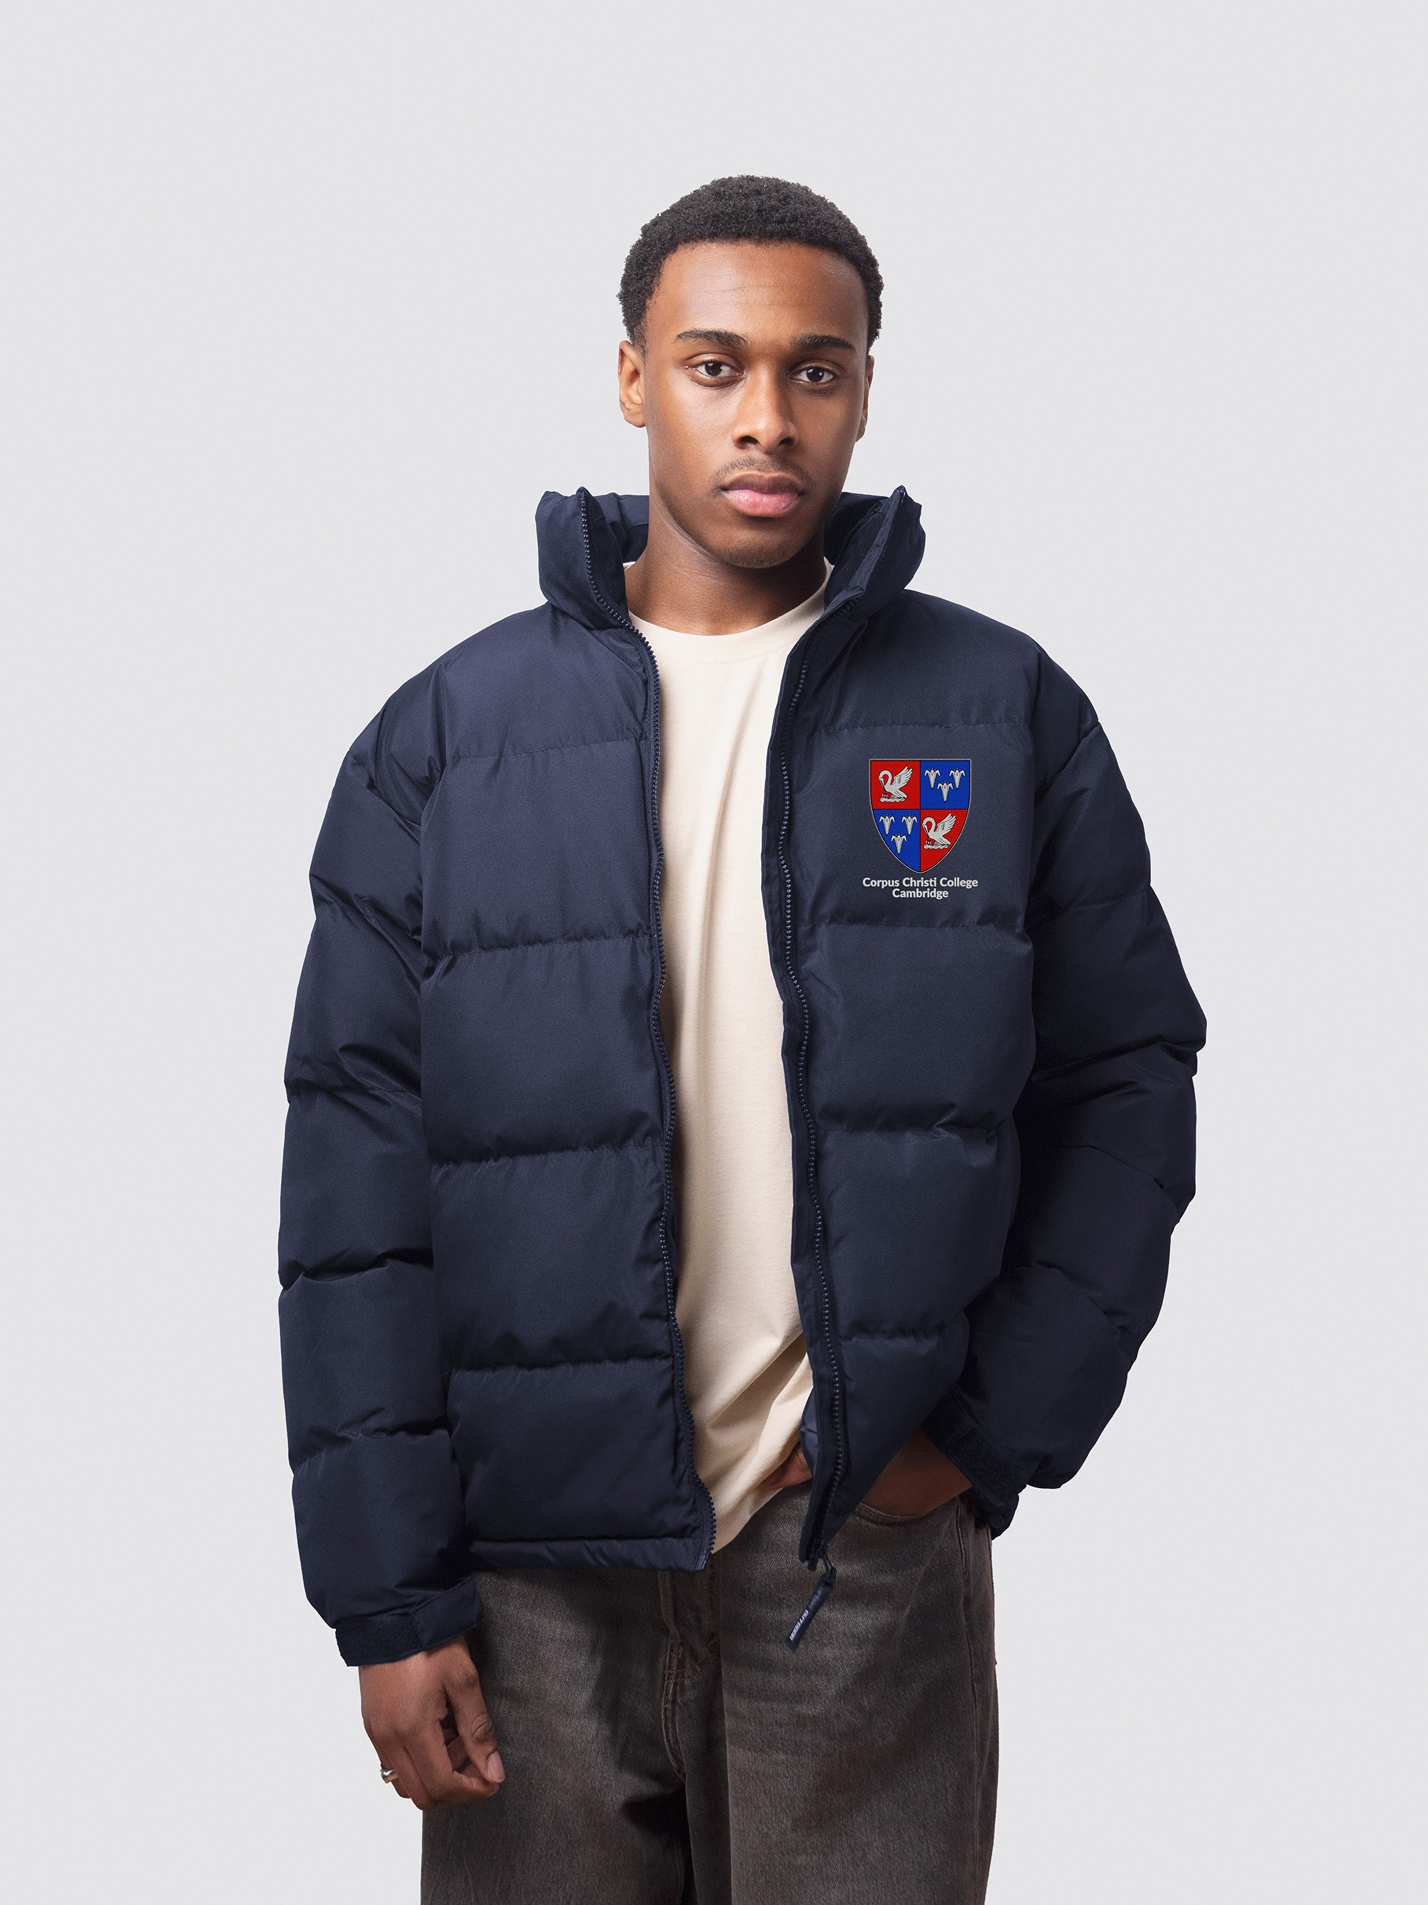 Navy Cambridge University puffer jacket, with embroidery on the left chest